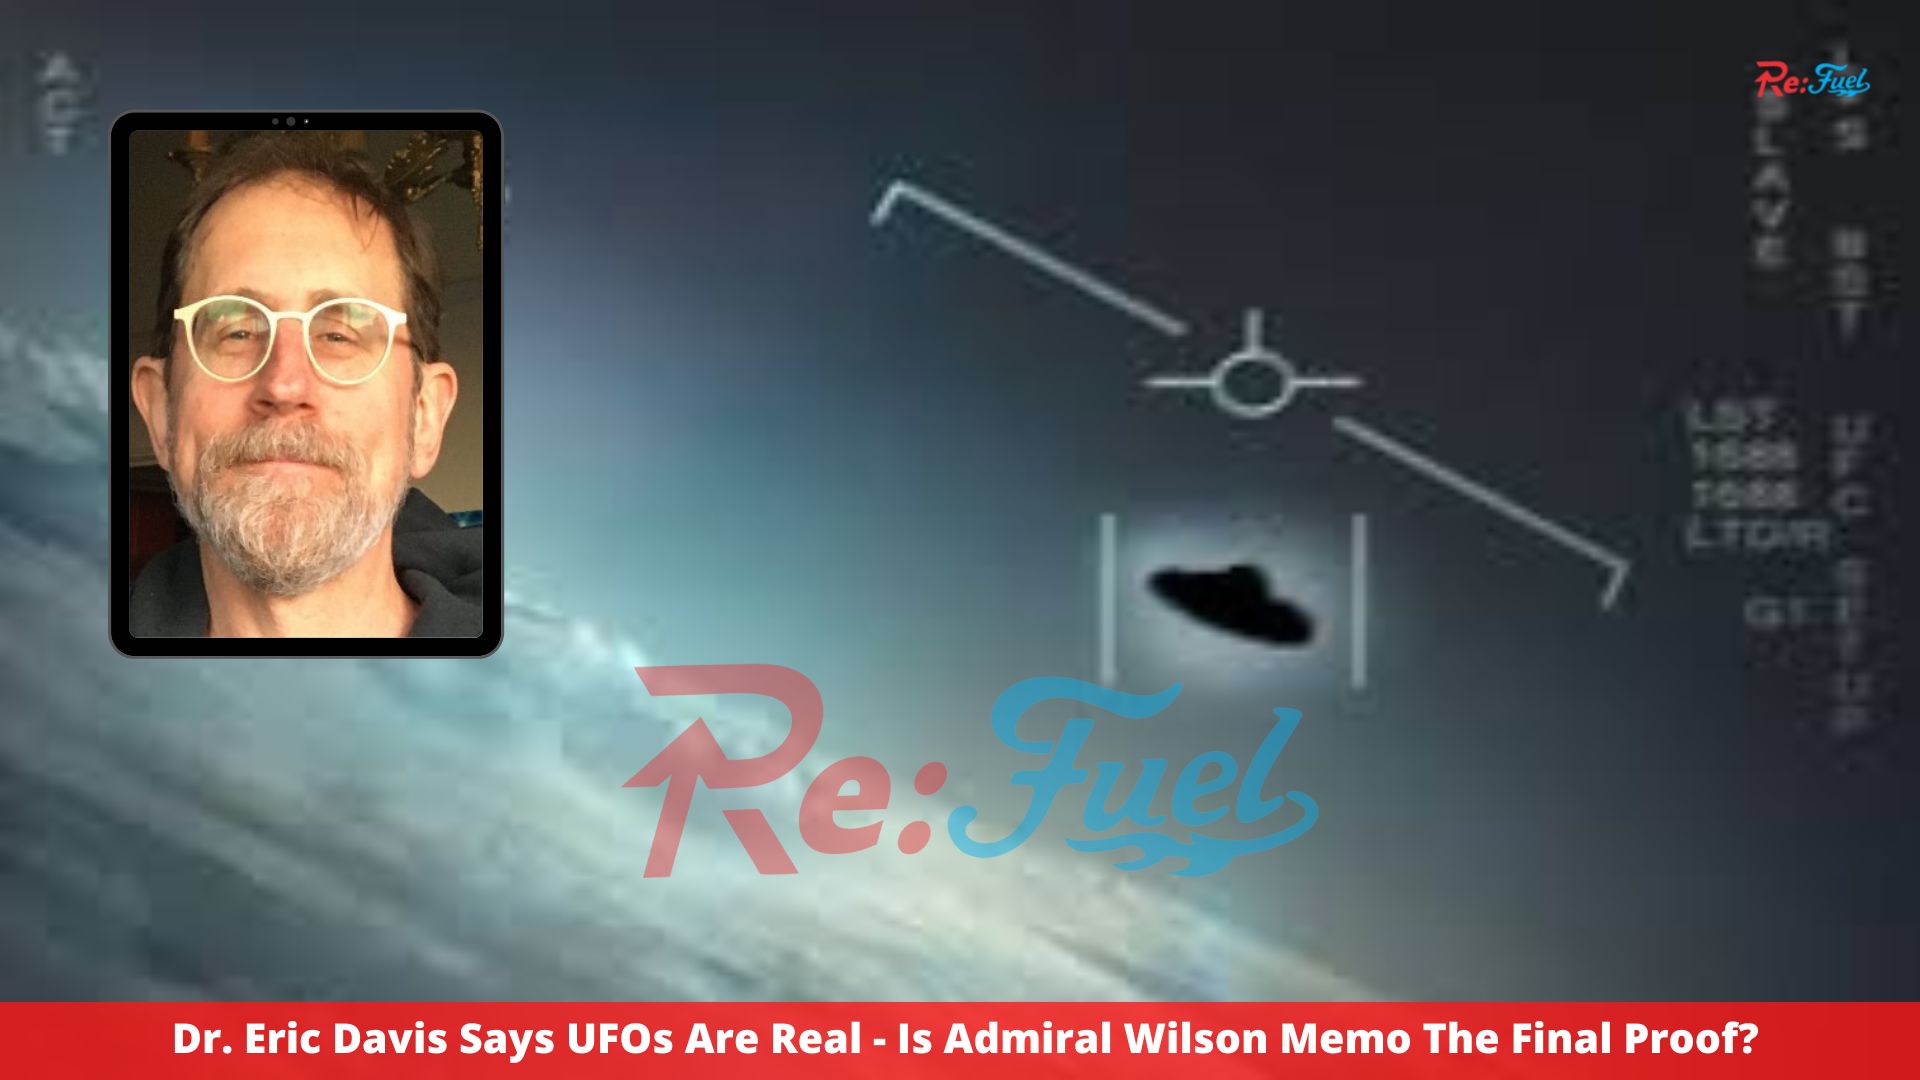 Dr. Eric Davis Says UFOs Are Real - Is Admiral Wilson Memo The Final Proof?